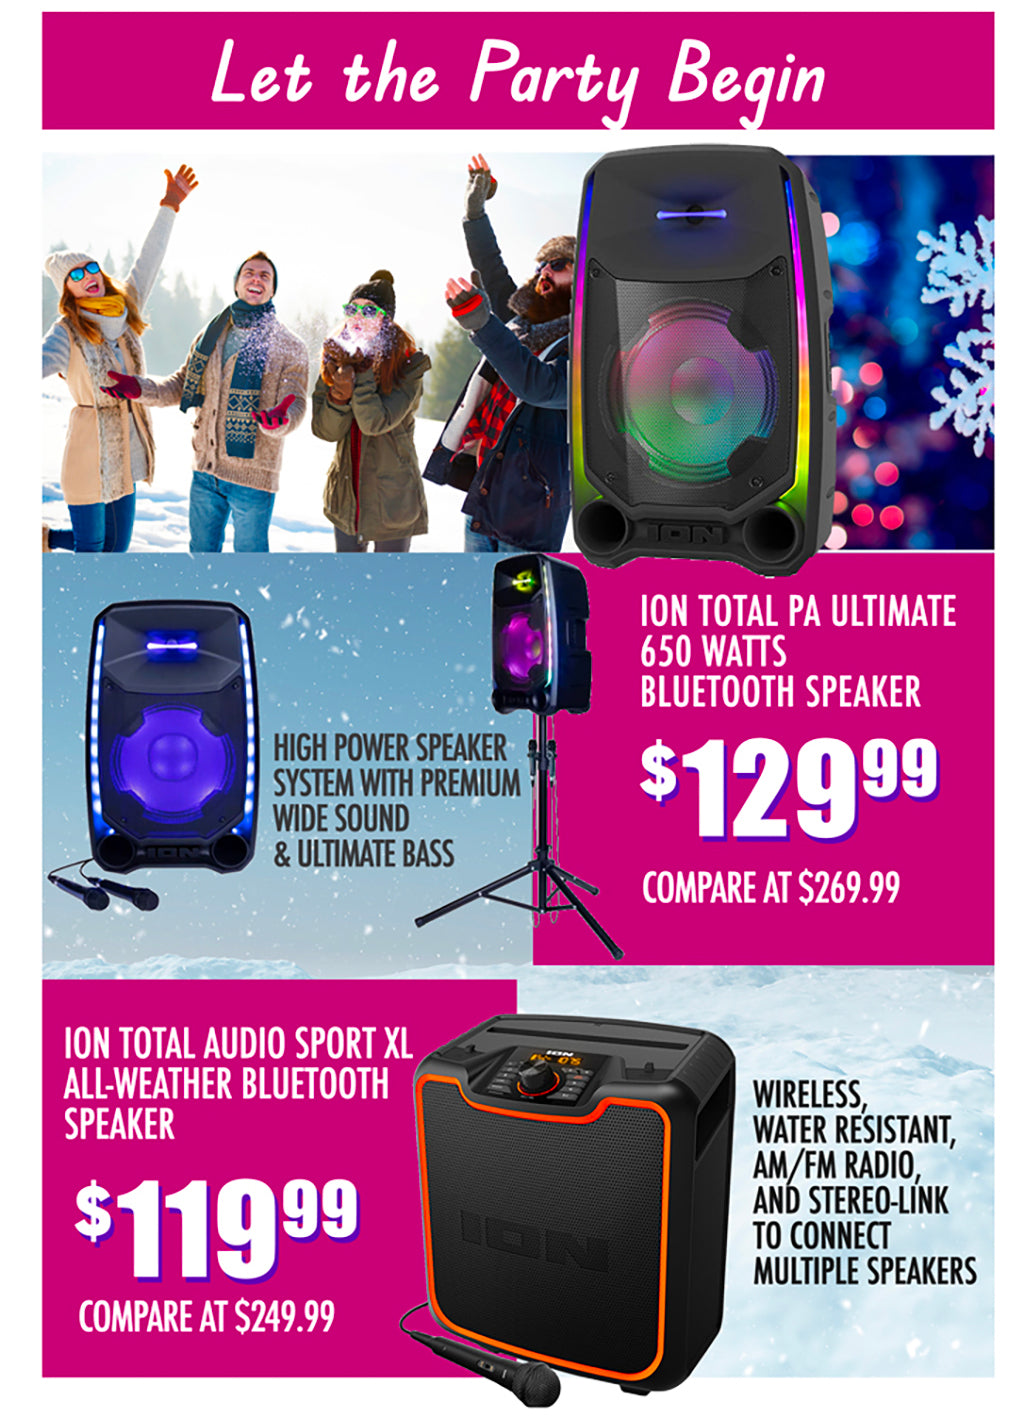 LET THE PARTY BEGIN! ION TOTAL PA ULTIMATE BLUETOOTH SPEAKER €129.99,  ION TOTAL AUDIO SPORT XL ALL WEATHER SPEAKER €119.99